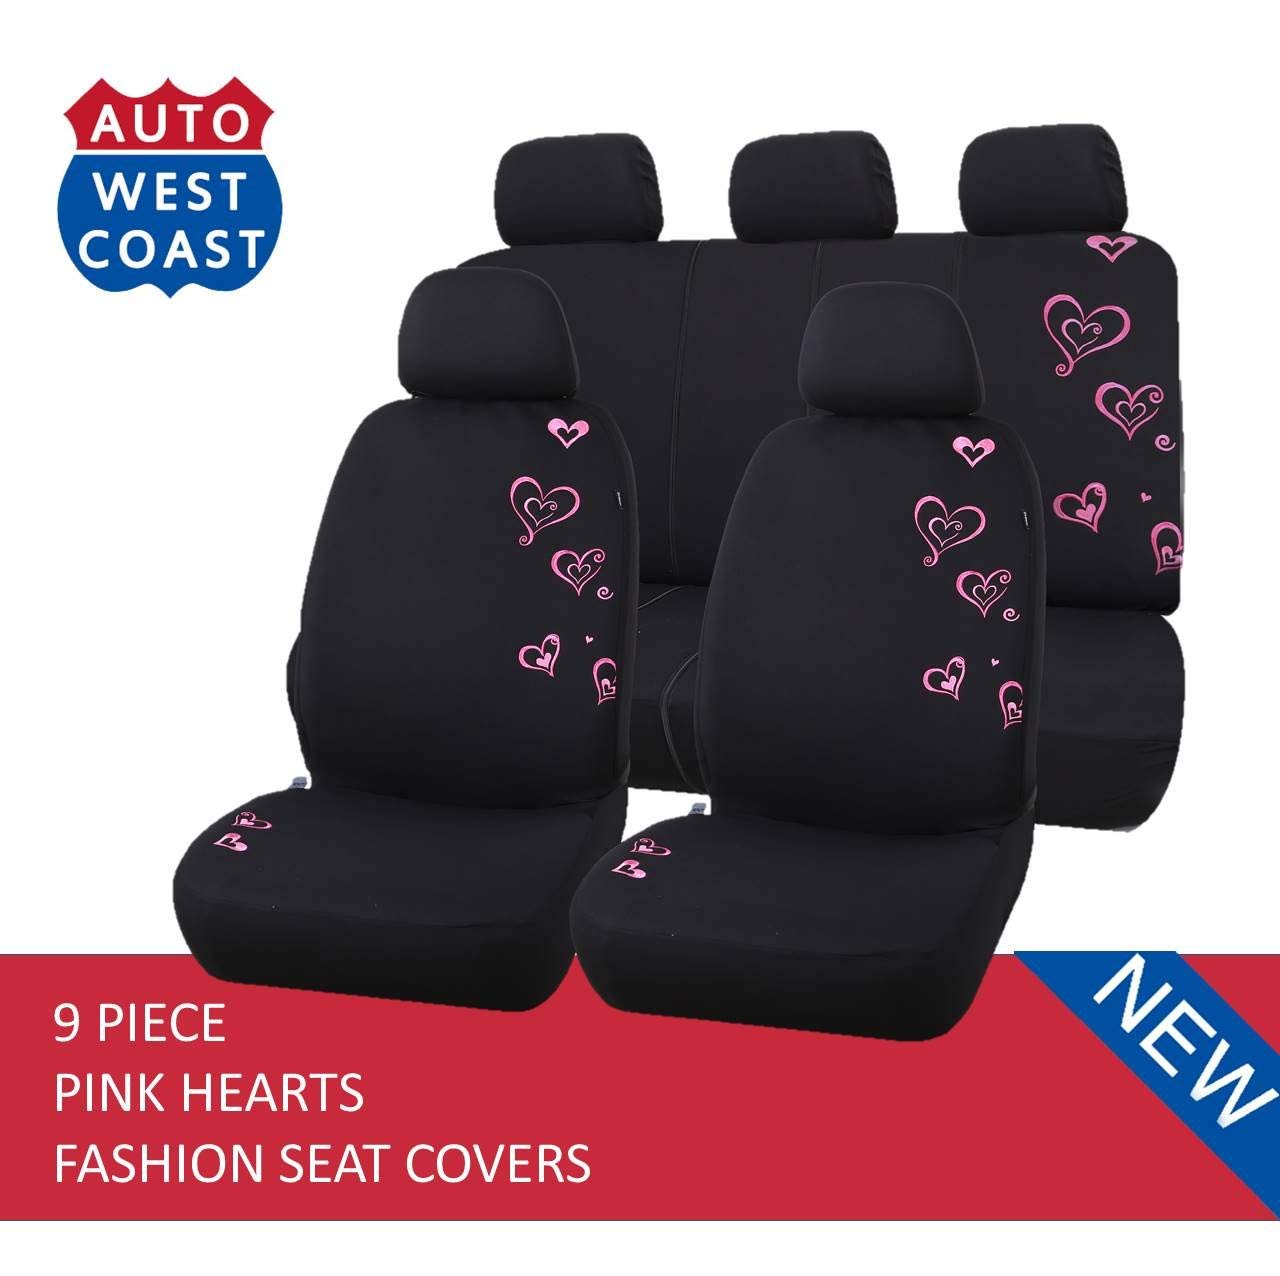 seat covers, best seat covers, best truck seat covers, best car seat covers, best truck seat covers reviews, nice seat covers, best custom seat covers, the best seat covers, best custom car seat covers, best rated seat covers for truck, best rated seat covers for cars, what are the best seat covers for trucks, best vehicle seat covers, seat cover brands, best suv seat covers, wet okole phone number, best seat covers for leather truck seats, leather seat covers for trucks, high quality seat covers, best rated seat covers, good seat covers, seat covers for leather seats, best leather seat covers, best pickup seat covers, best custom fit truck seat covers, truck seat cover reviews, best seat covers on the market, who makes the best truck seat covers, custom seat covers, truck seat covers, high quality auto seat covers, best neoprene seat covers, tailor made seat covers, custom seat cover shop, custom tailored seat covers, exact fit seat covers, custom seats, high quality auto seat covers, king cover, custom fit truck seat covers, aftermarket seat covers, best fitting seat covers, custom seat covers near me, best truck seat covers, quality seat covers, premium seat covers, perfect fit seat covers, high quality seat covers, coverking neoprene seat covers, fitted seat covers for trucks, best custom car seat covers, custom made seat covers, fitted car seat covers, best seat covers, custom fit car seat covers, best custom seat covers, fitted seat covers, custom seat covers for trucks, custom fit seat covers, custom seat covers, seat cover reviews, car pass seat covers, car seat sweat protector, best truck seat covers, sweat seat cover, car seat cover reviews, best truck seat covers, truck seat cover reviews, car seat sweat cover, best car seat covers reviews, good seat covers, best auto seat covers, post workout car seat cover, best fitting seat covers, post workout seat cover, best car seat covers, best affordable seat covers, best 4x4 seat covers, wet okole reviews, high quality seat covers, best fitting seat covers, the best seat covers, good seat covers, best rated seat covers for trucks, truck seat cover reviews, what are the best seat covers for trucks, nice seat covers,